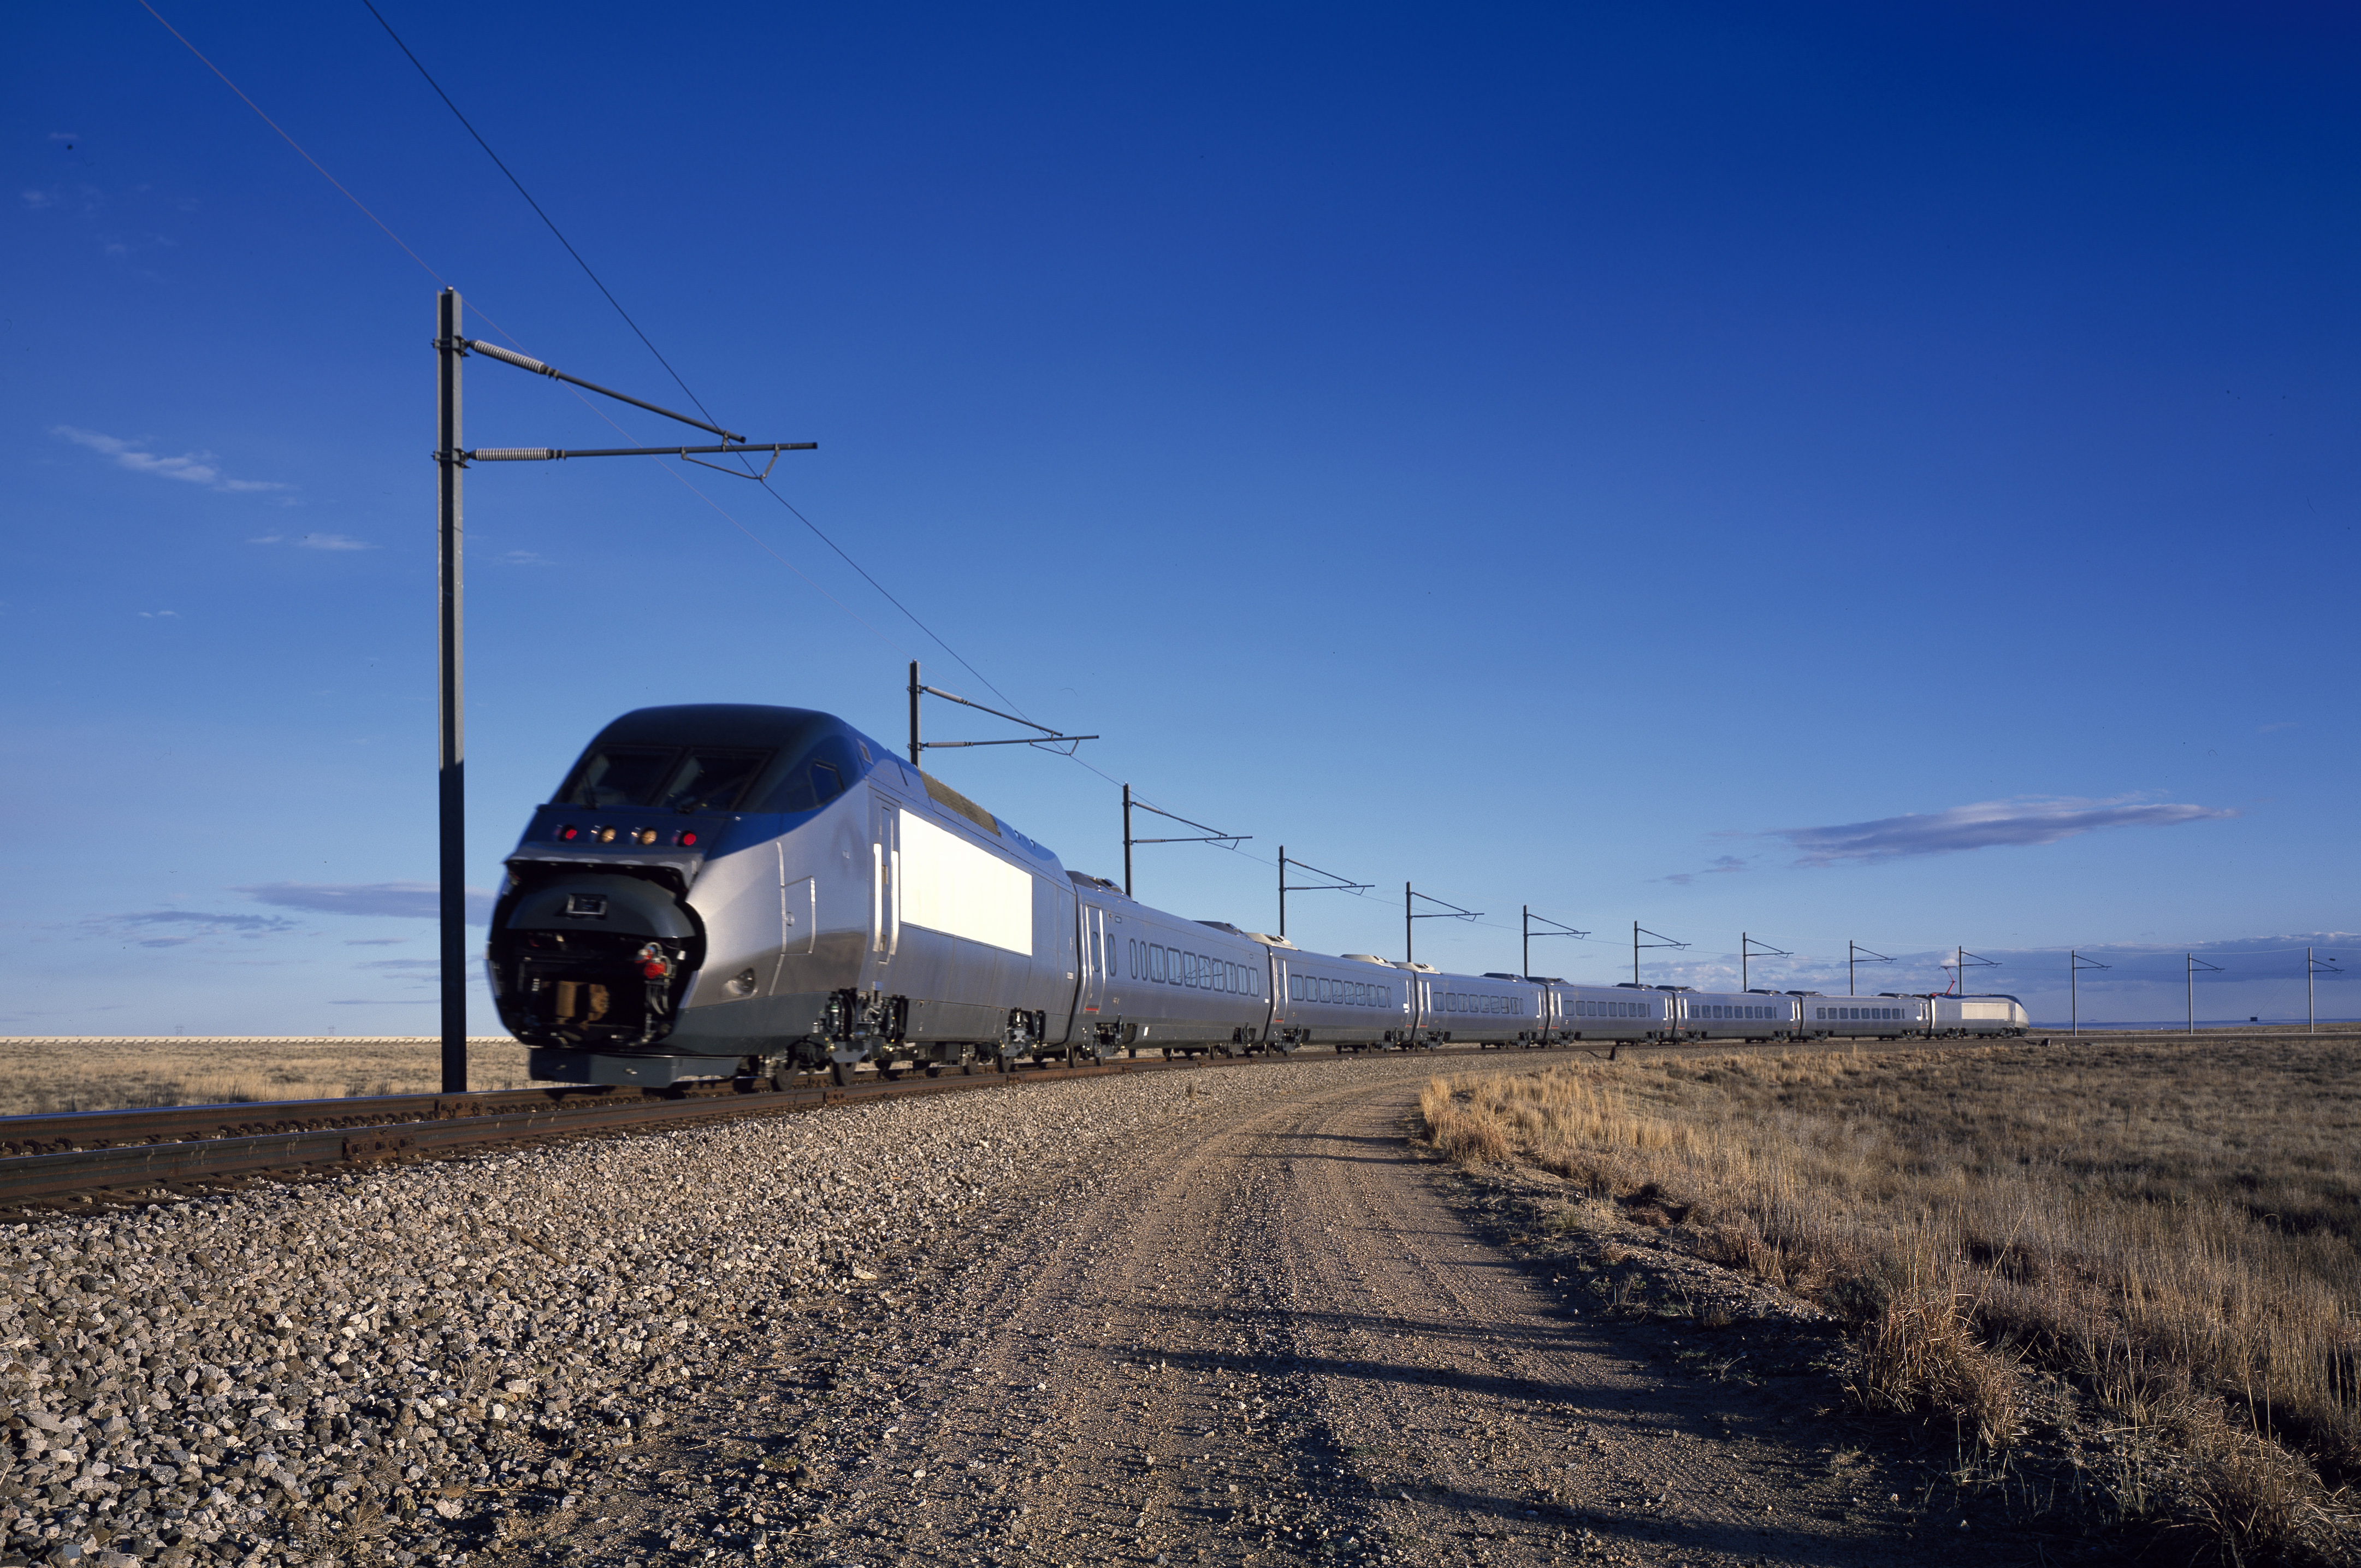 An Amtrak Acela high-speed train is tested in Pueblo, Colo. (Carol M. Highsmith—Buyenlarge/Getty Images)